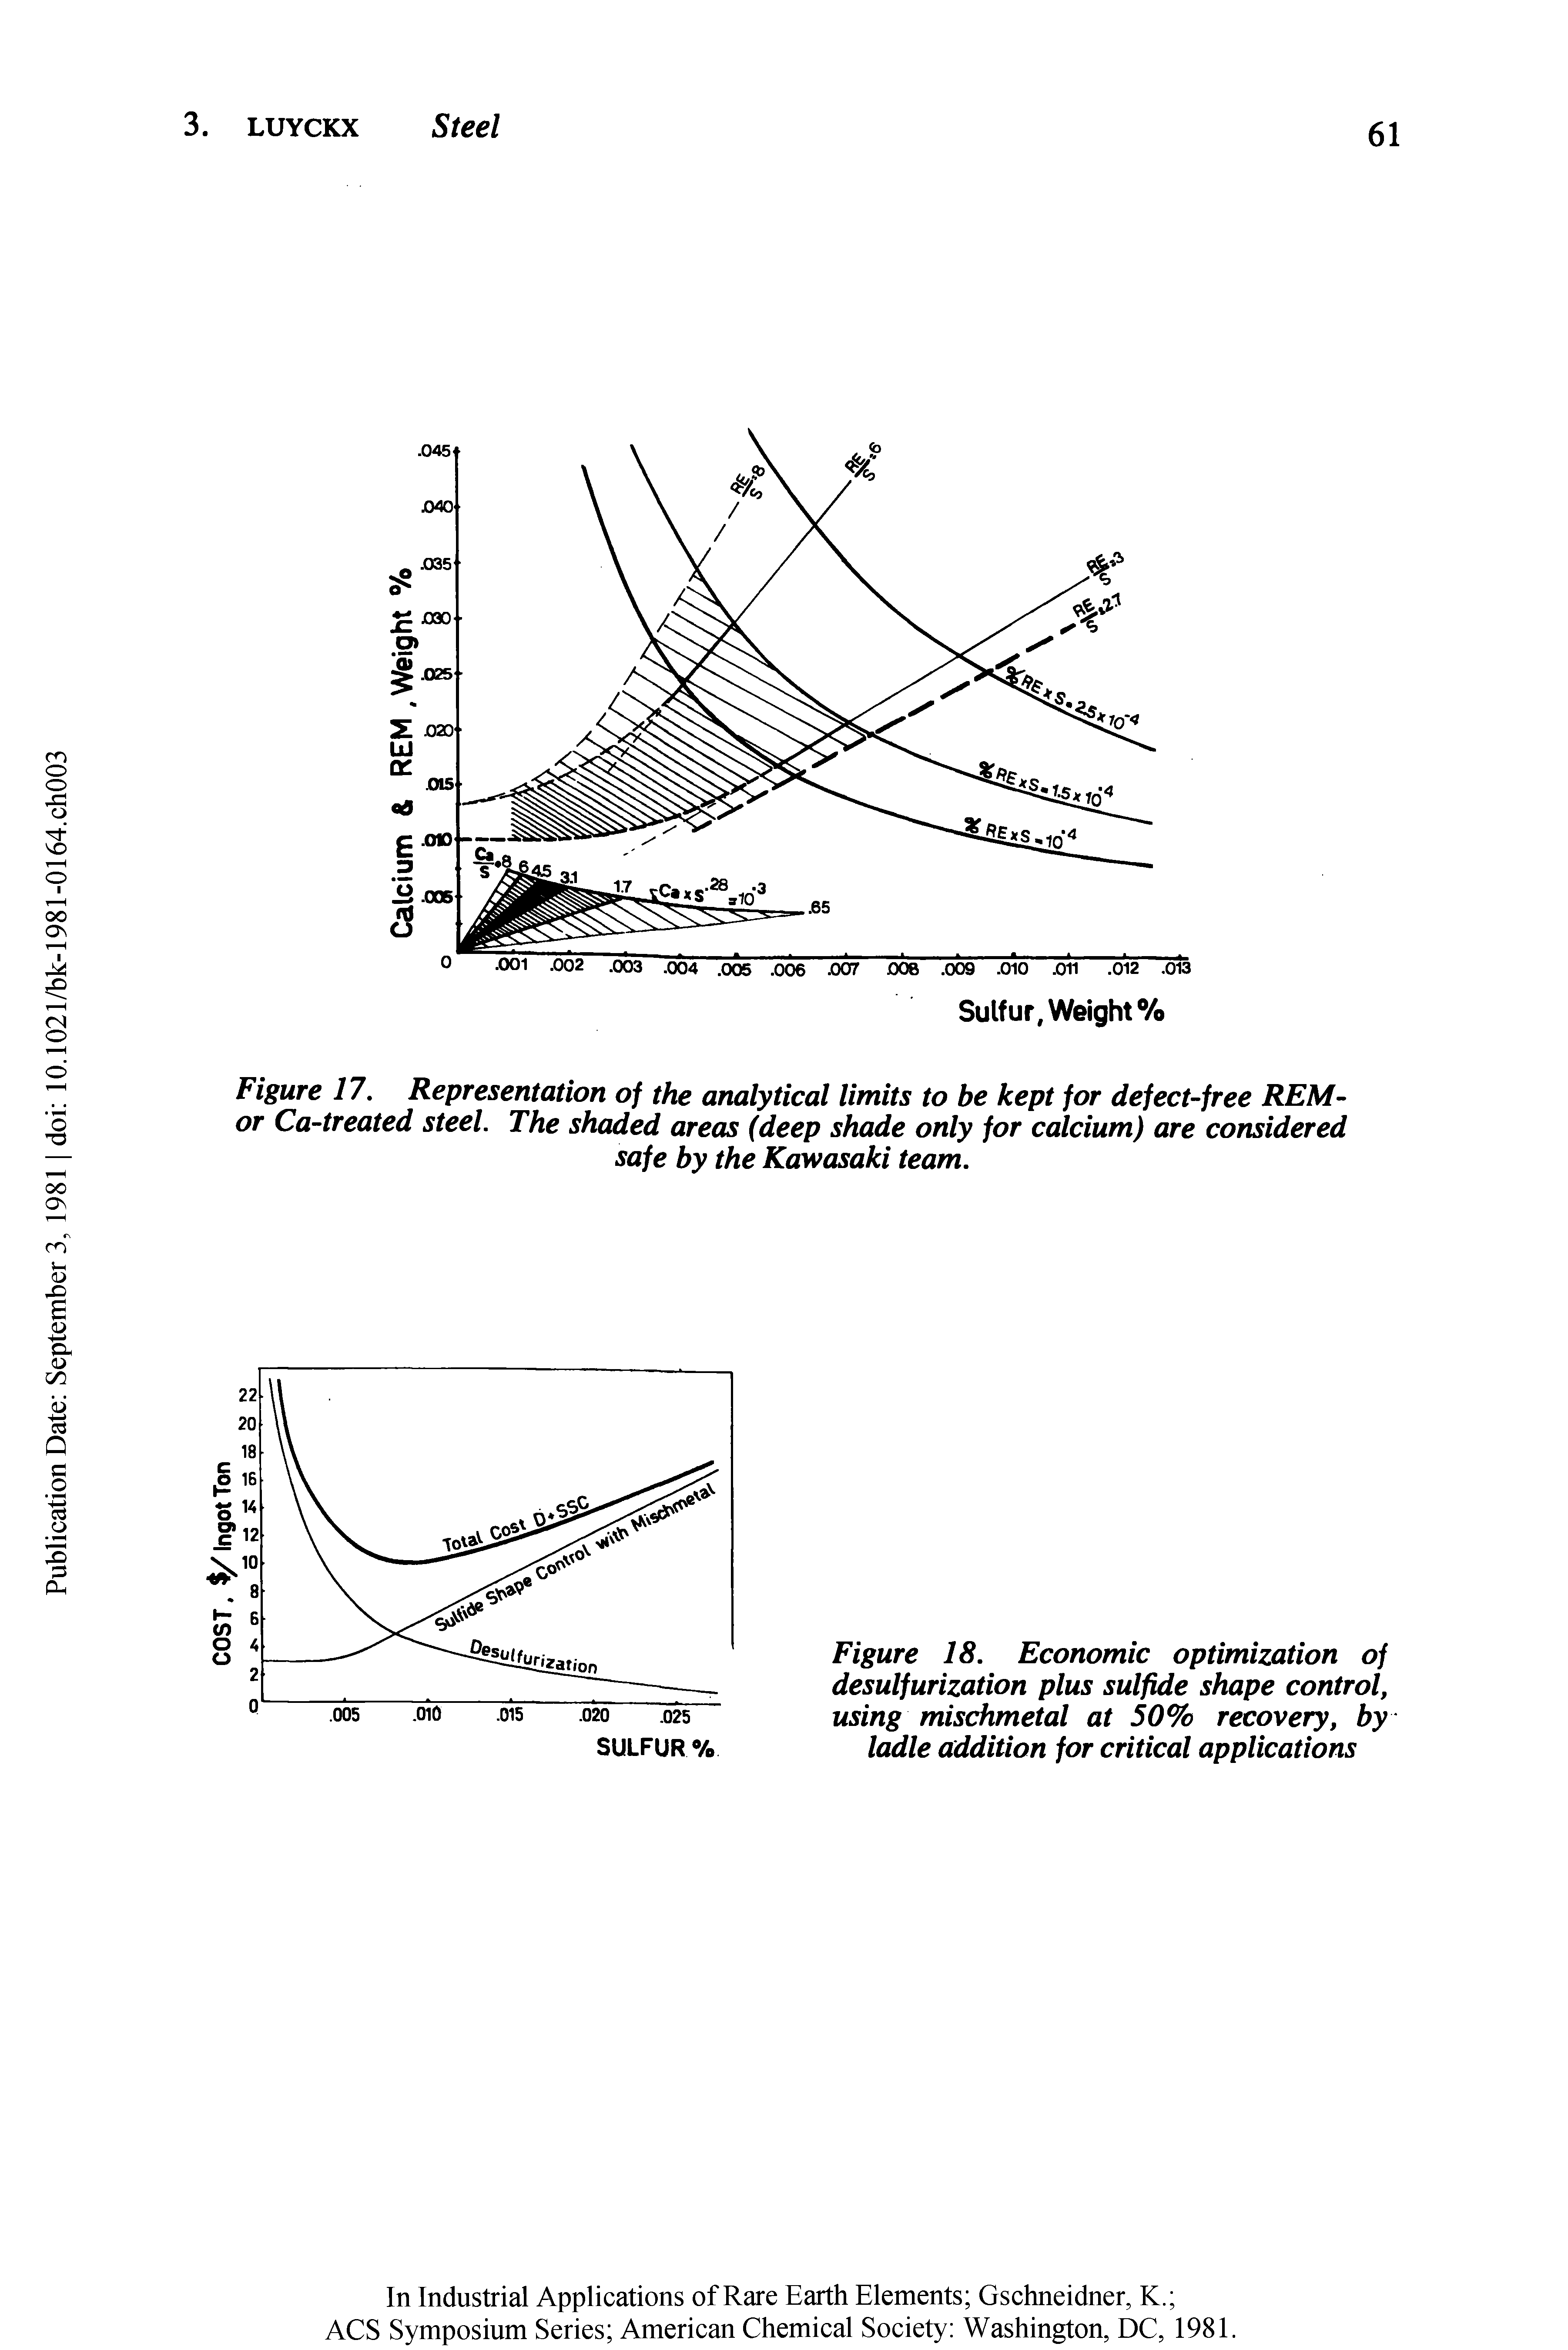 Figure 18. Economic optimization of desulfurization plus sulfide shape control, using mischmetal at 50% recovery, by ladle addition for critical applications...